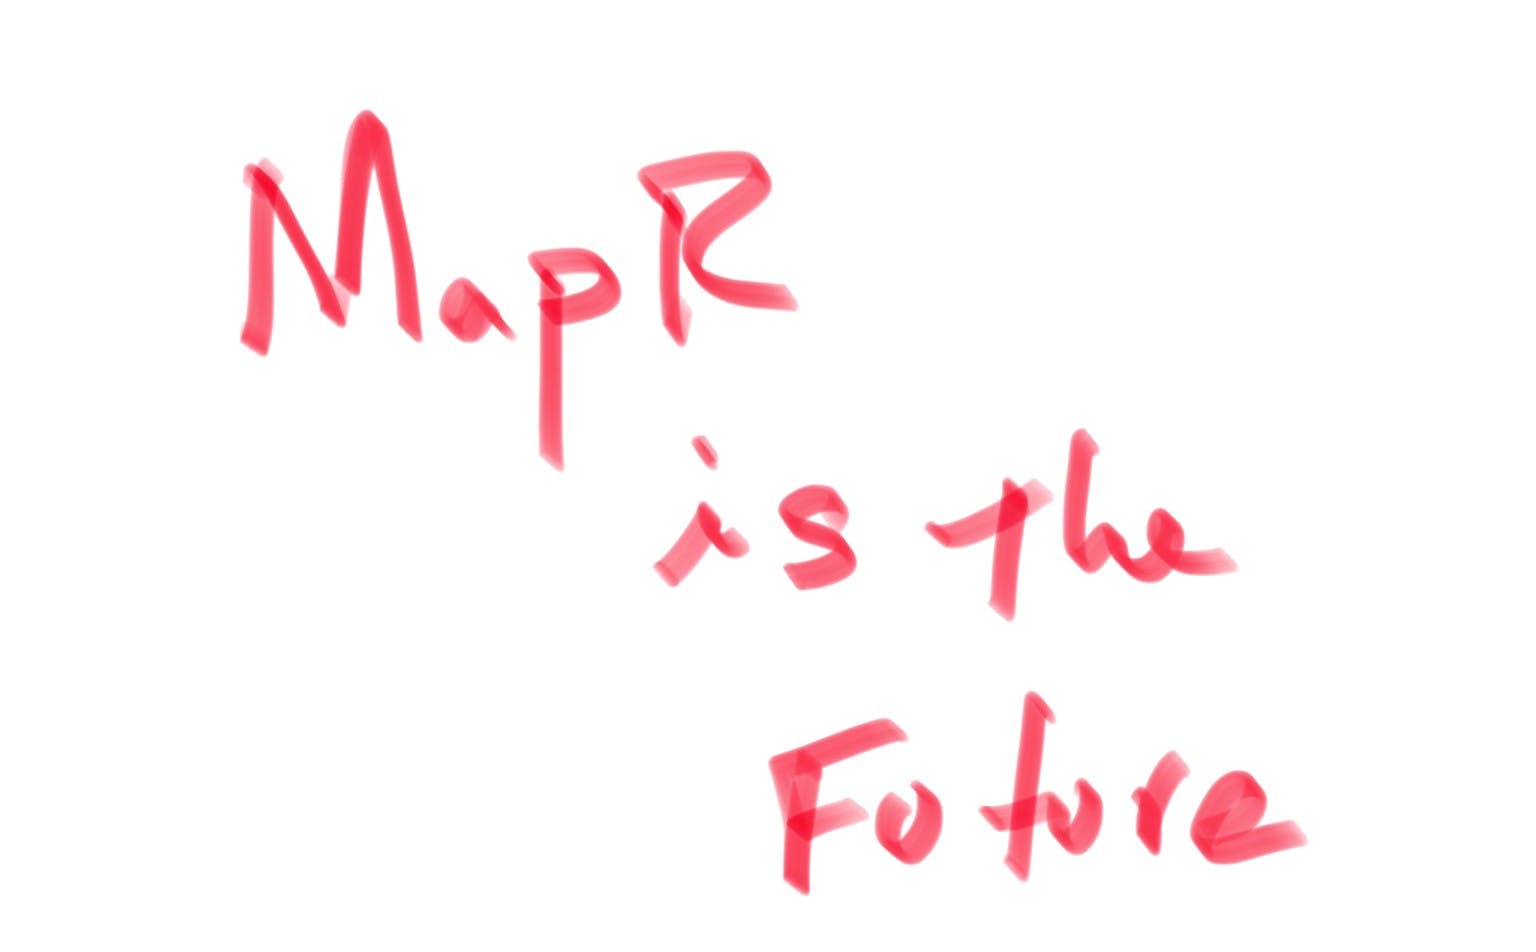 /why-did-marcelo-choose-mapr-577fd654aad5 feature image